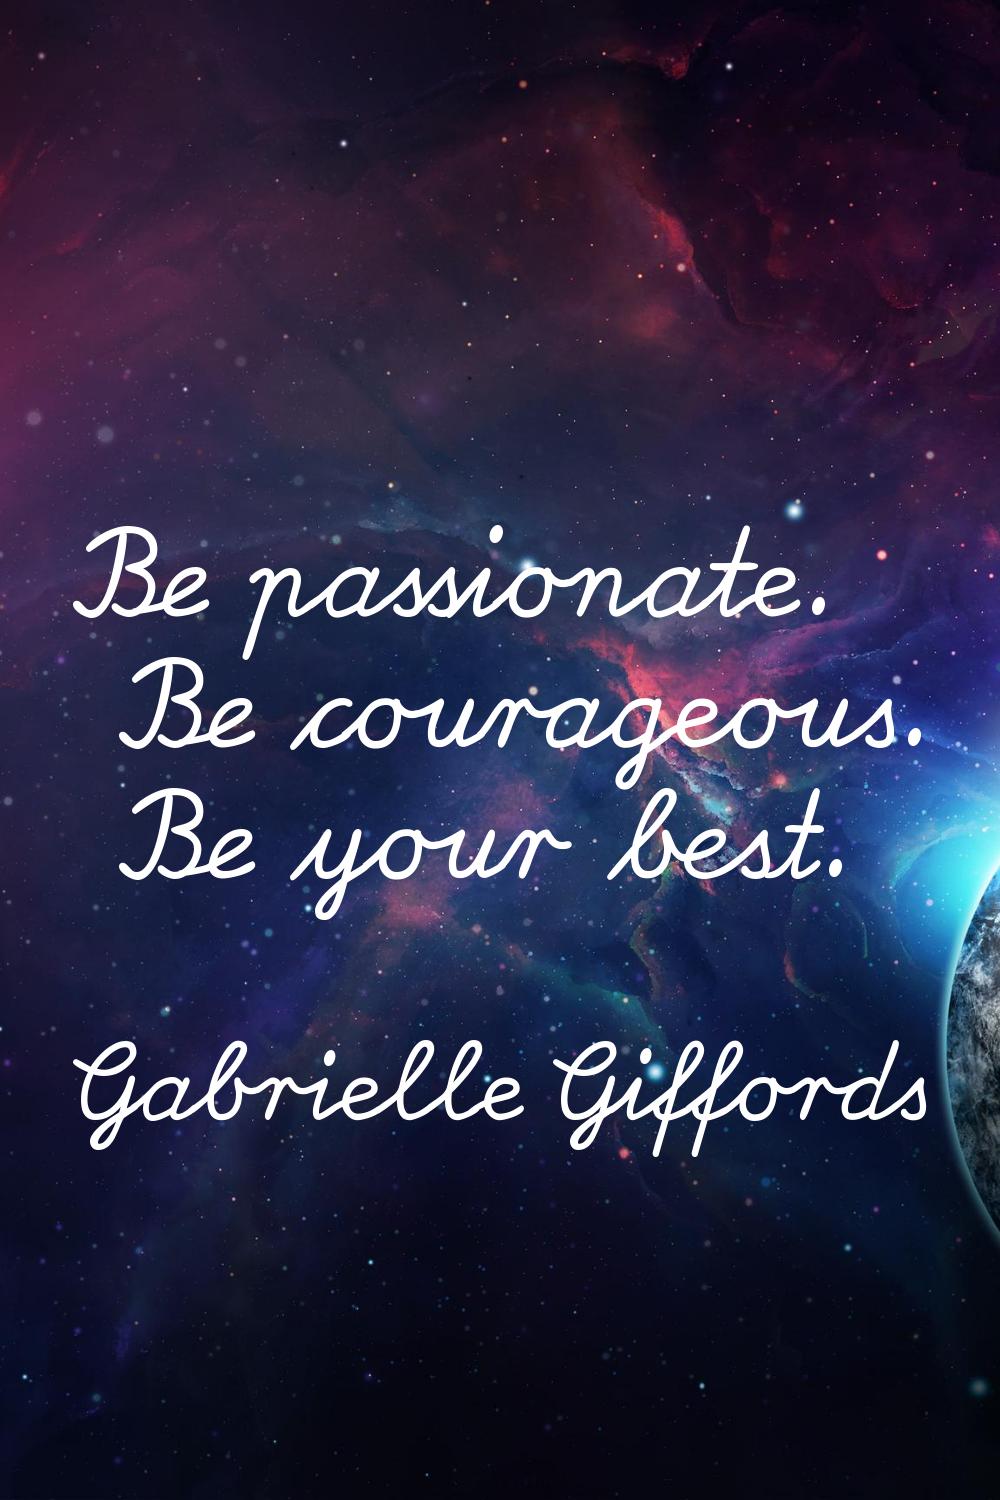 Be passionate. Be courageous. Be your best.